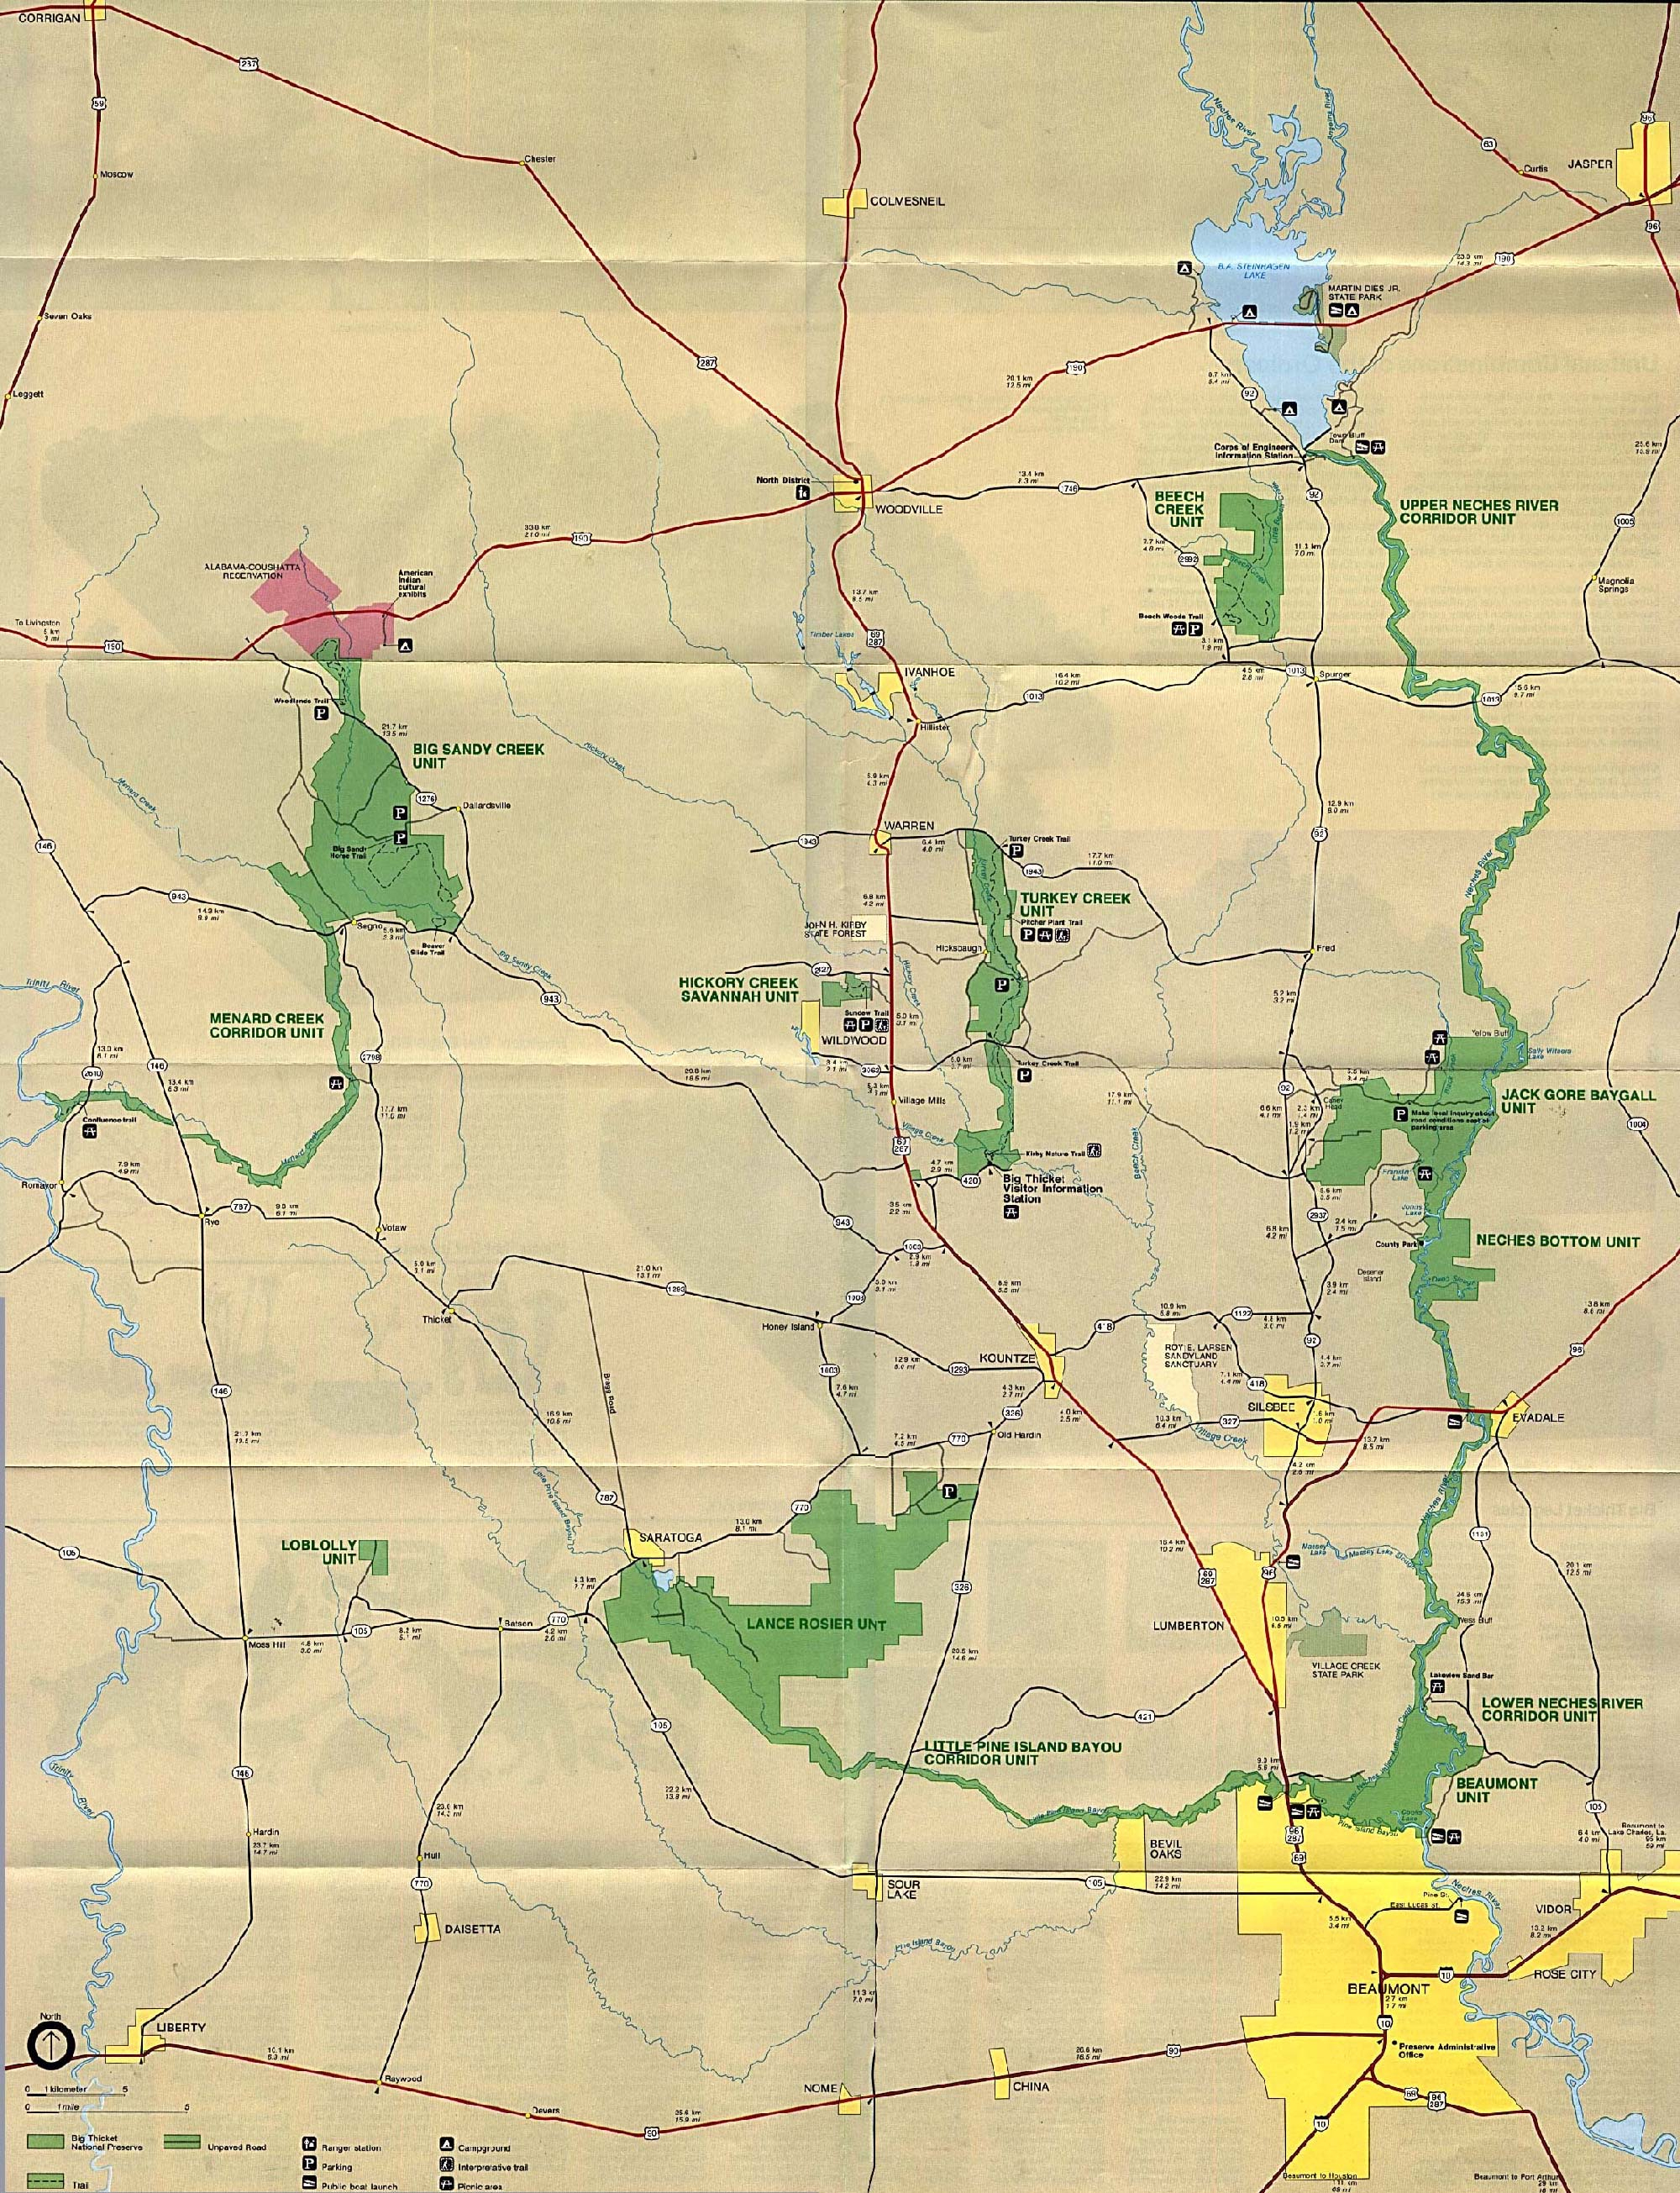 Texas State And National Park Maps - Perry-Castañeda Map Collection - Texas Parks And Wildlife Map